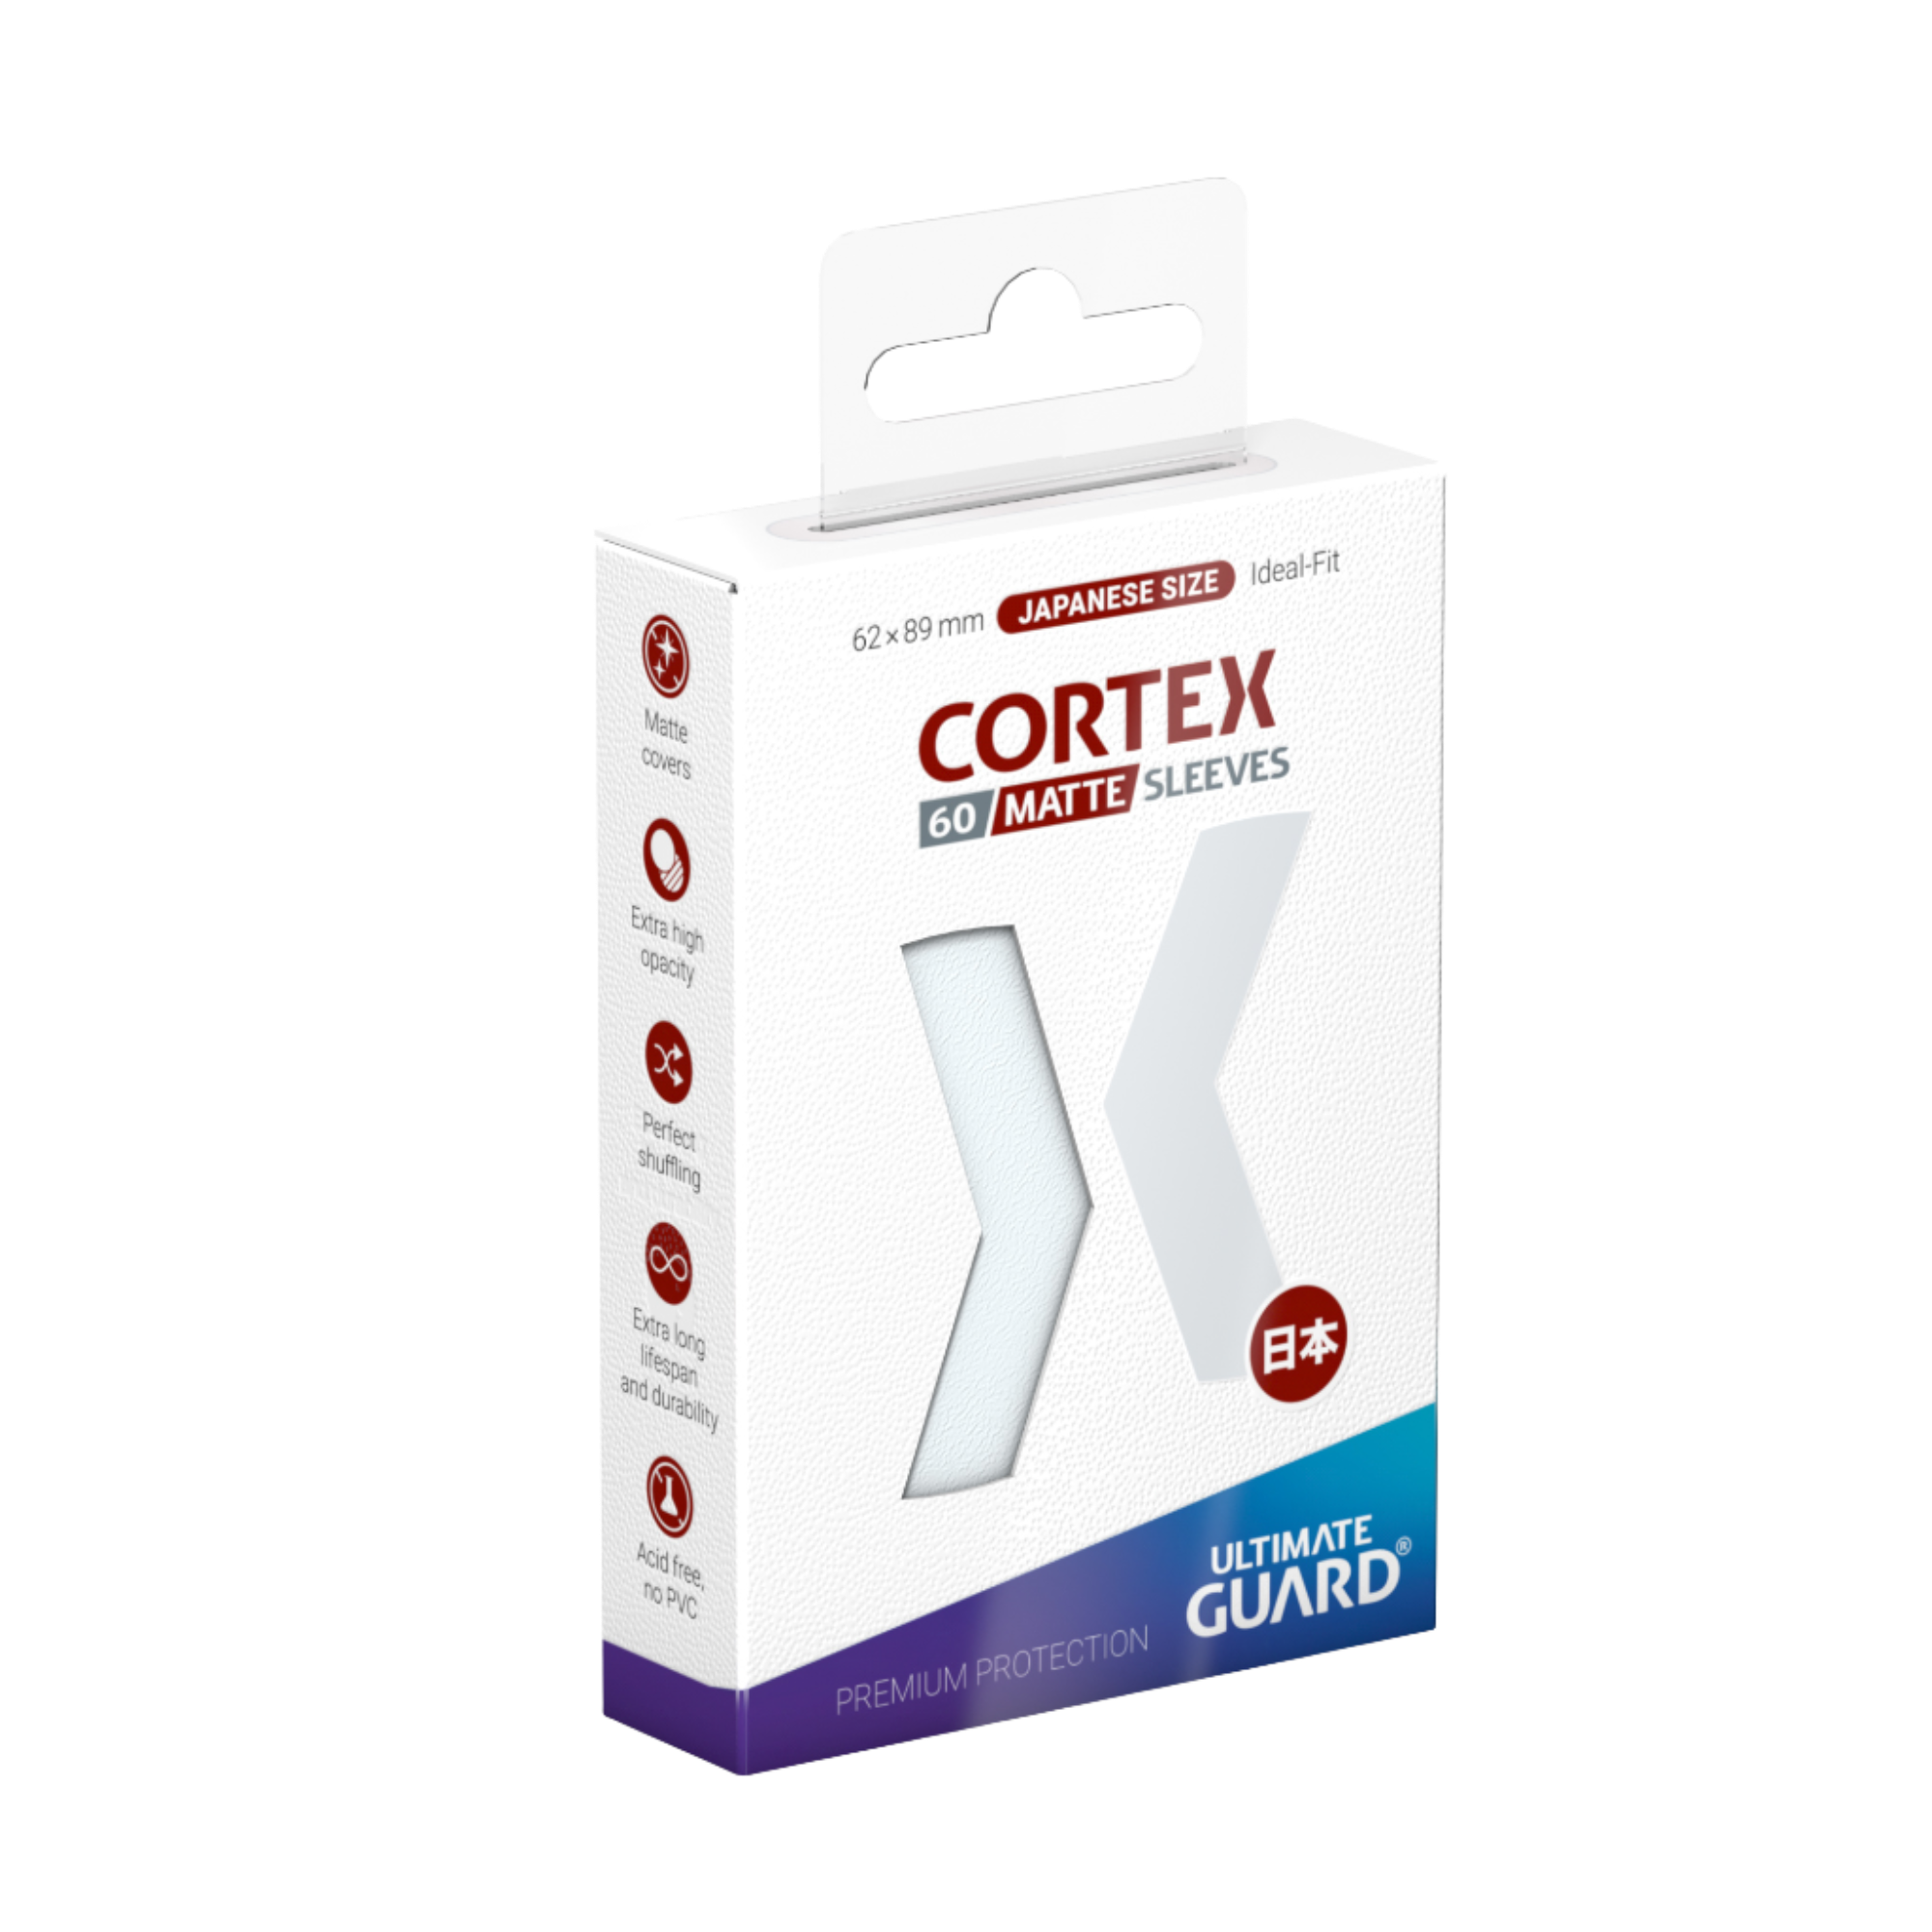 Ultimate Guard - Cortex Sleeves - Japanese Size - Ideal-Fit - Matte Transparent - 60pk